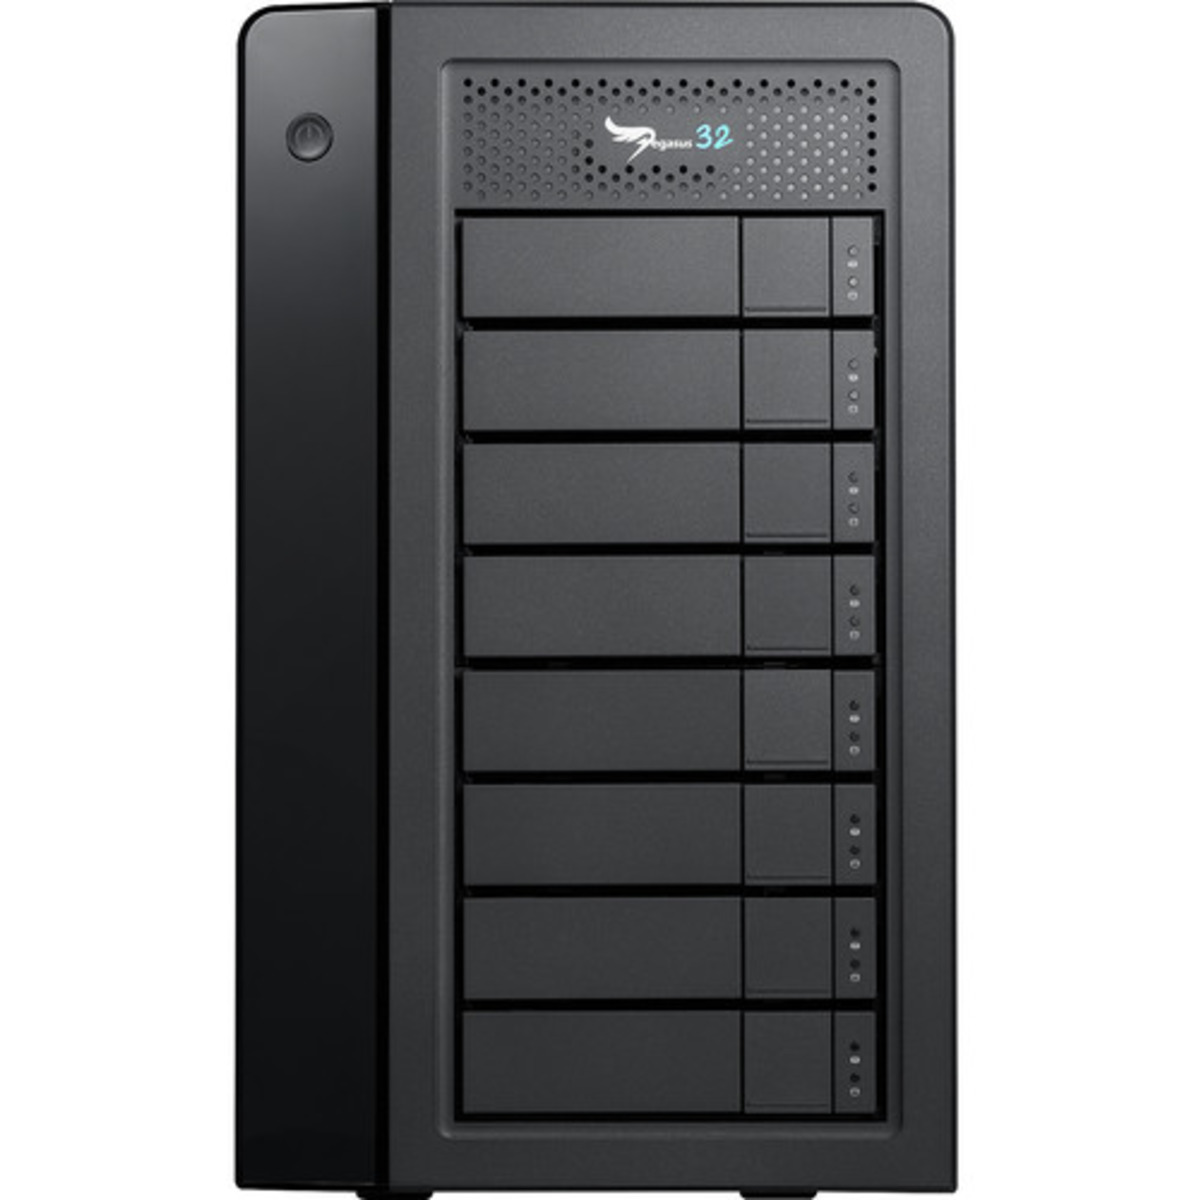 Promise Technology Pegasus32 R8 Thunderbolt 3 16tb 8-Bay Desktop Multimedia / Power User / Business DAS - Direct Attached Storage Device 8x2tb Sandisk Ultra 3D SDSSDH3-2T00 2.5 560/520MB/s SATA 6Gb/s SSD CONSUMER Class Drives Installed - Burn-In Tested - ON SALE Pegasus32 R8 Thunderbolt 3